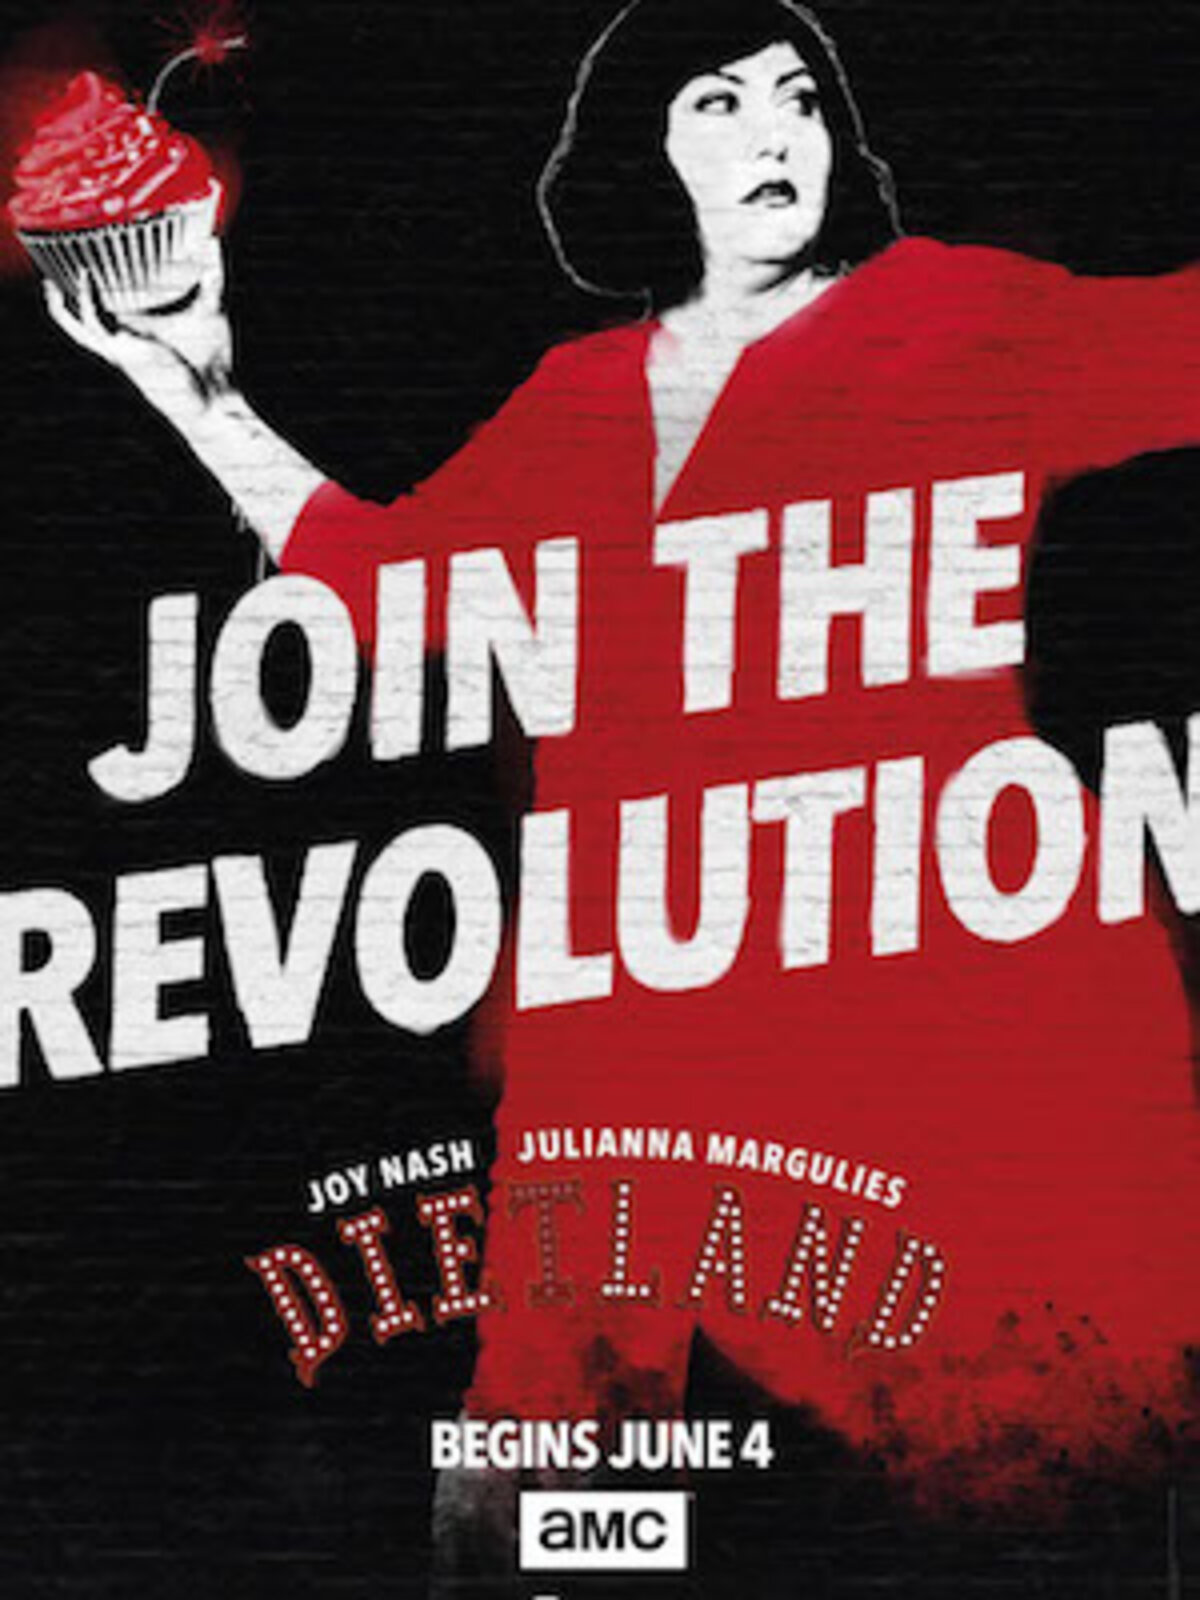 A woman in a red dress holding a cupcake with the text "Join the Revolution" for Dietland book cover